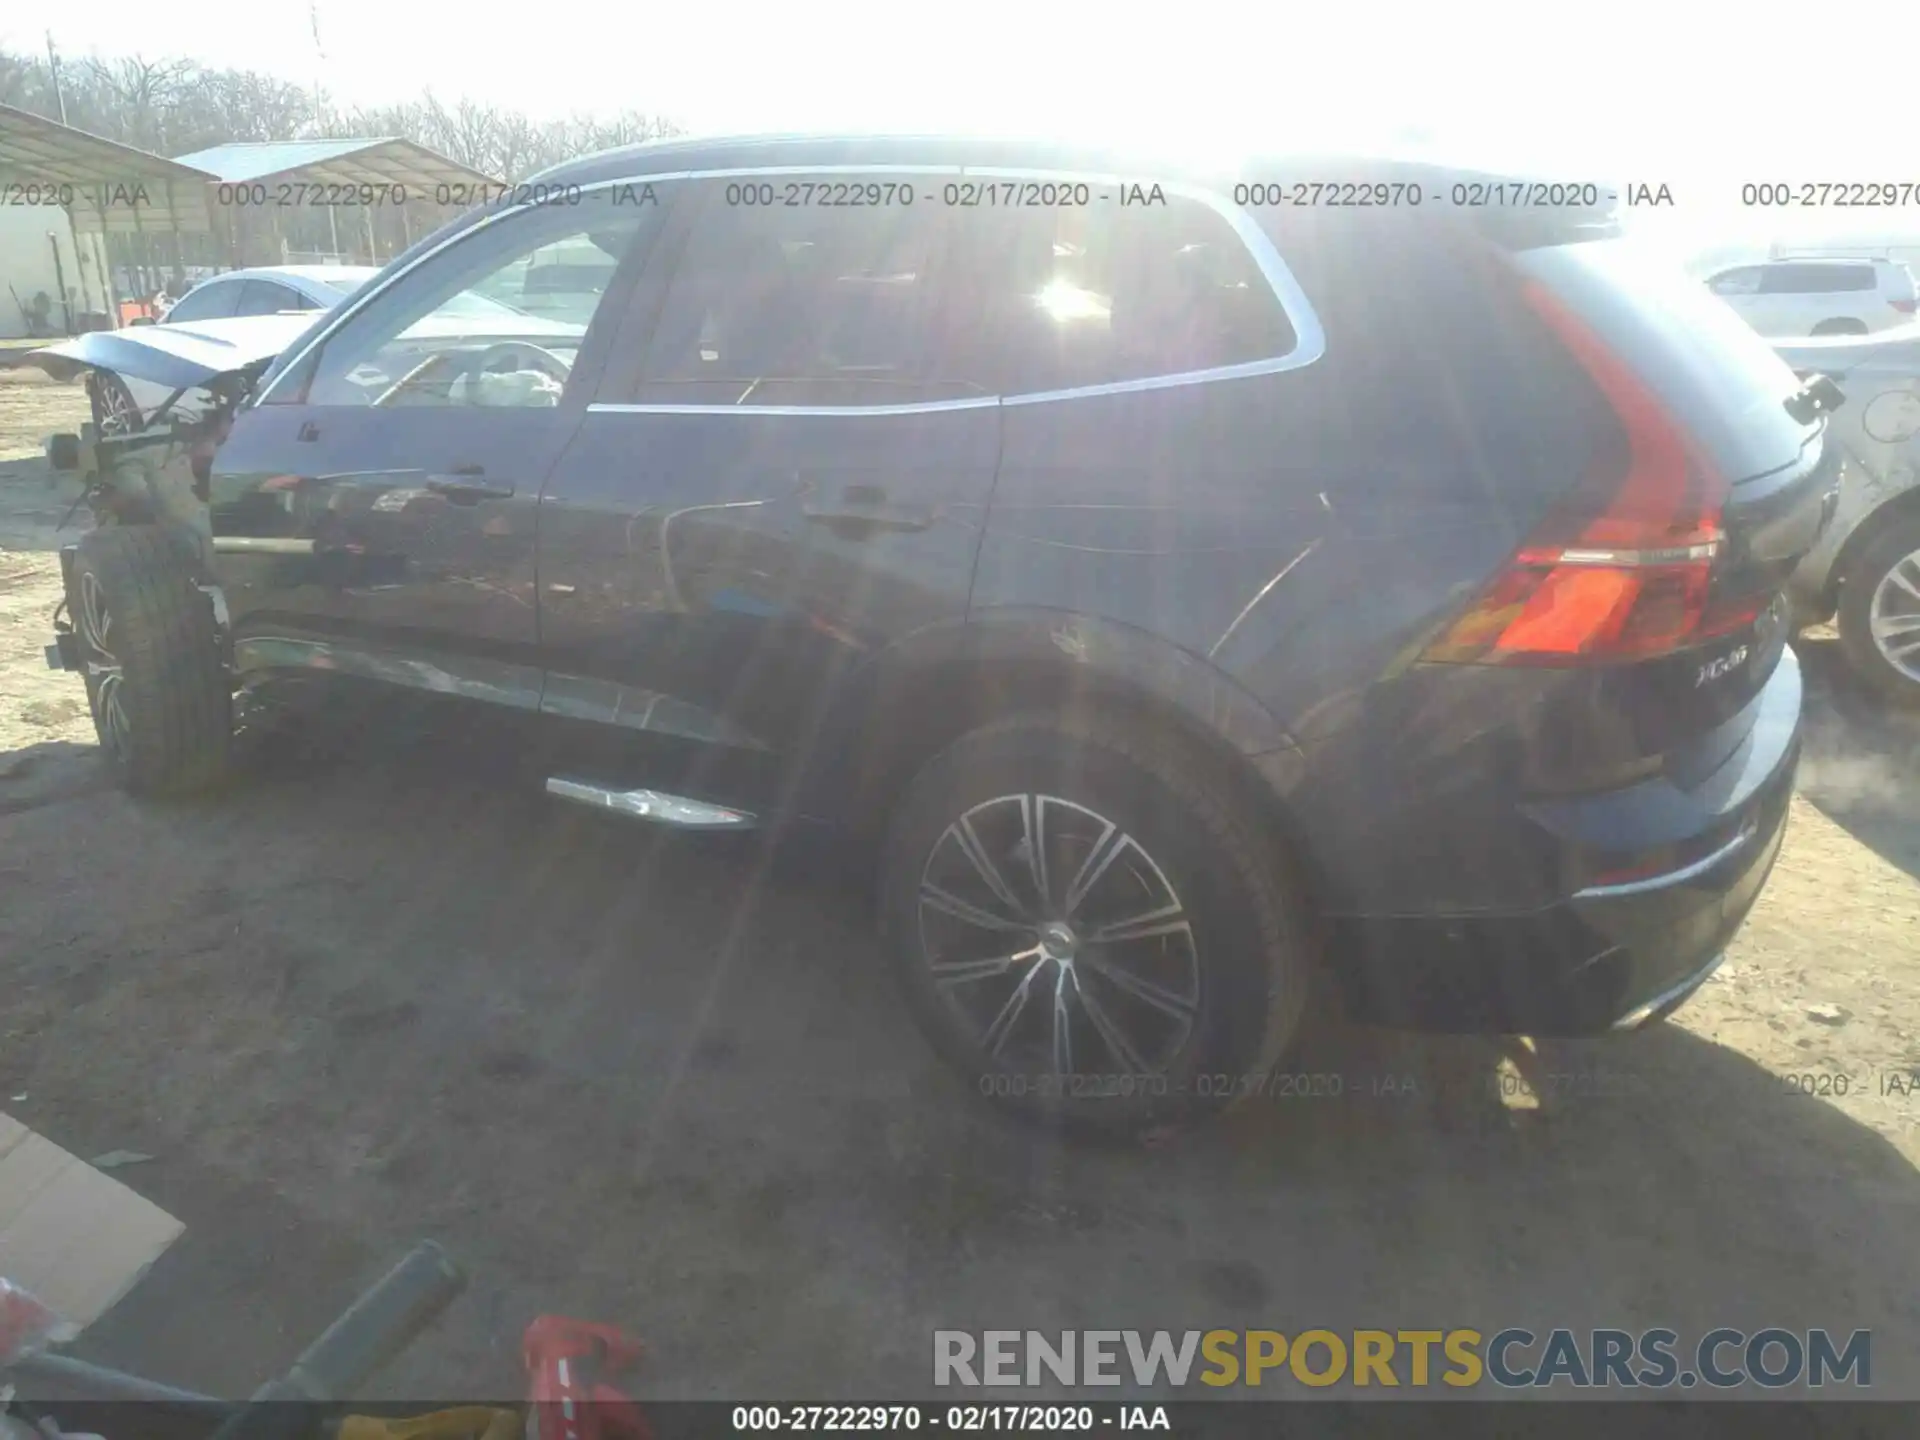 3 Photograph of a damaged car LYV102RLXKB327136 VOLVO XC60 2019